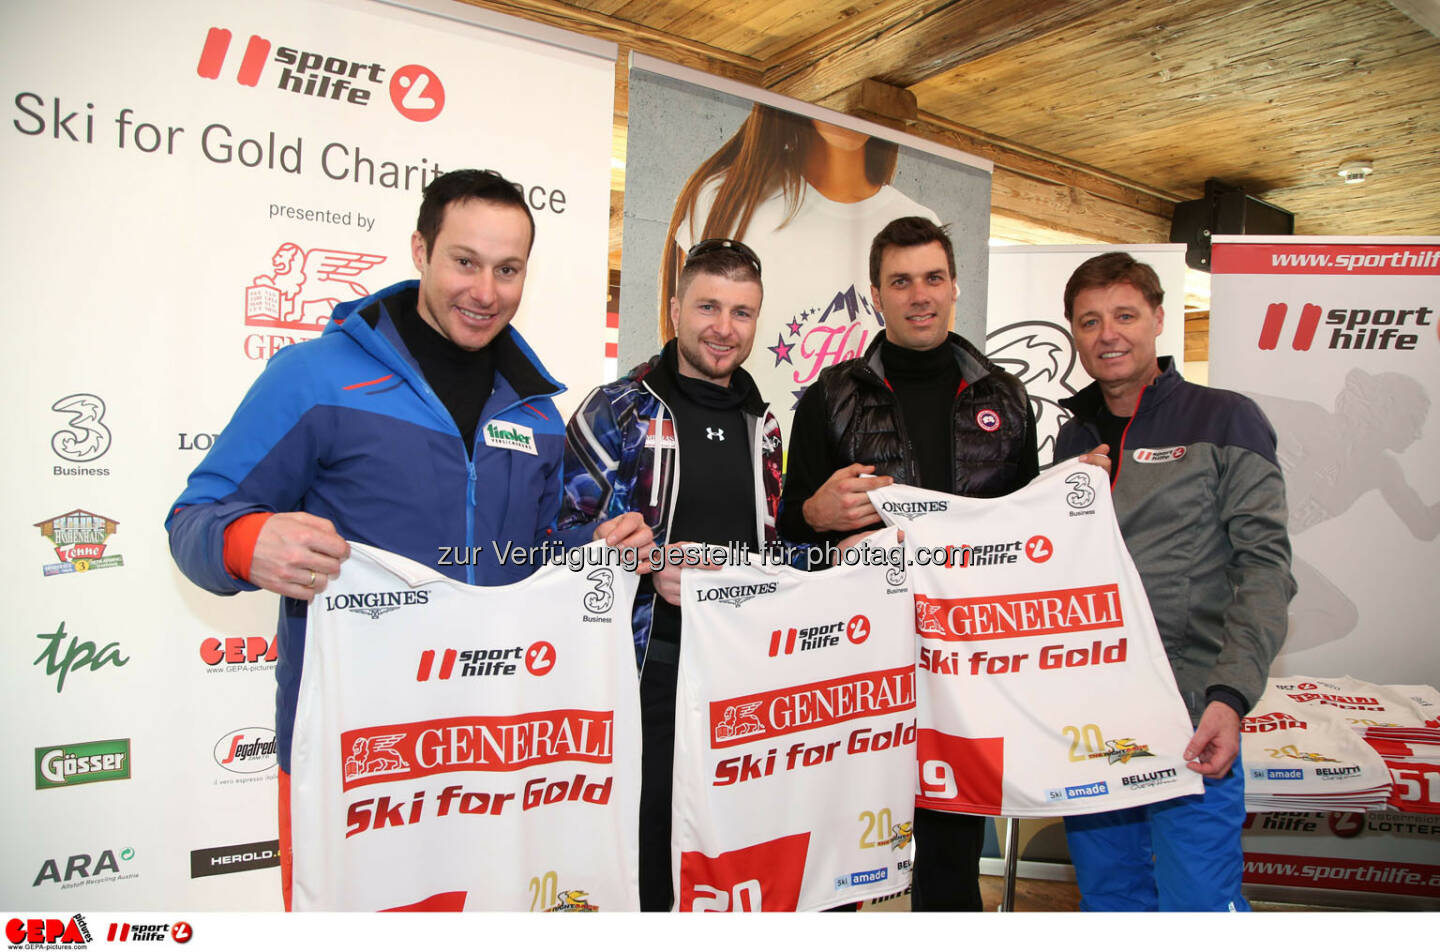 Ski for Gold Charity Race. Image shows Manfred Pranger, Reinfried Herbst, Mario Matt and managing director Harald Bauer (Sporthilfe). Photo: GEPA pictures/ Harald Steiner